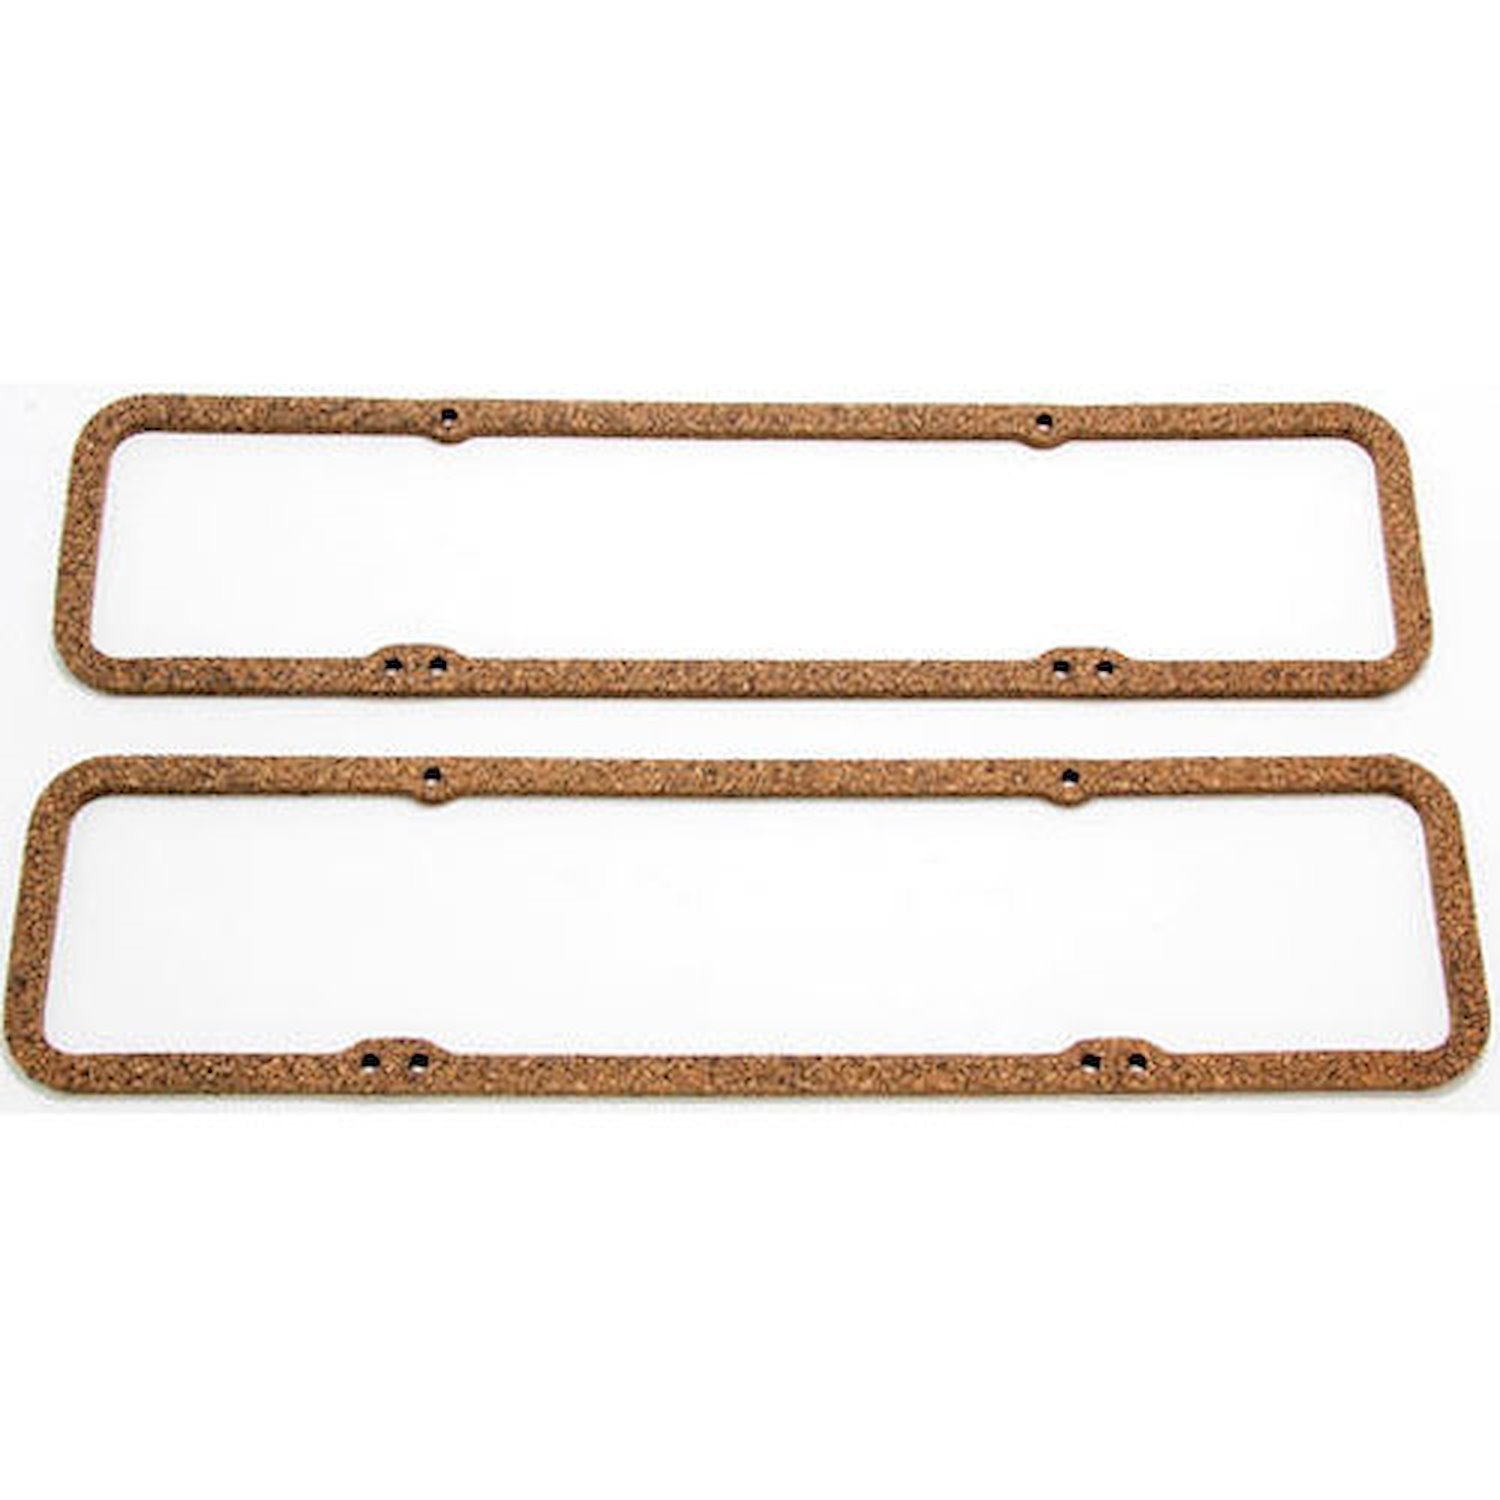 Thick Valve Cover Gaskets 1955-1986 Small Block Chevy 265-350 V8